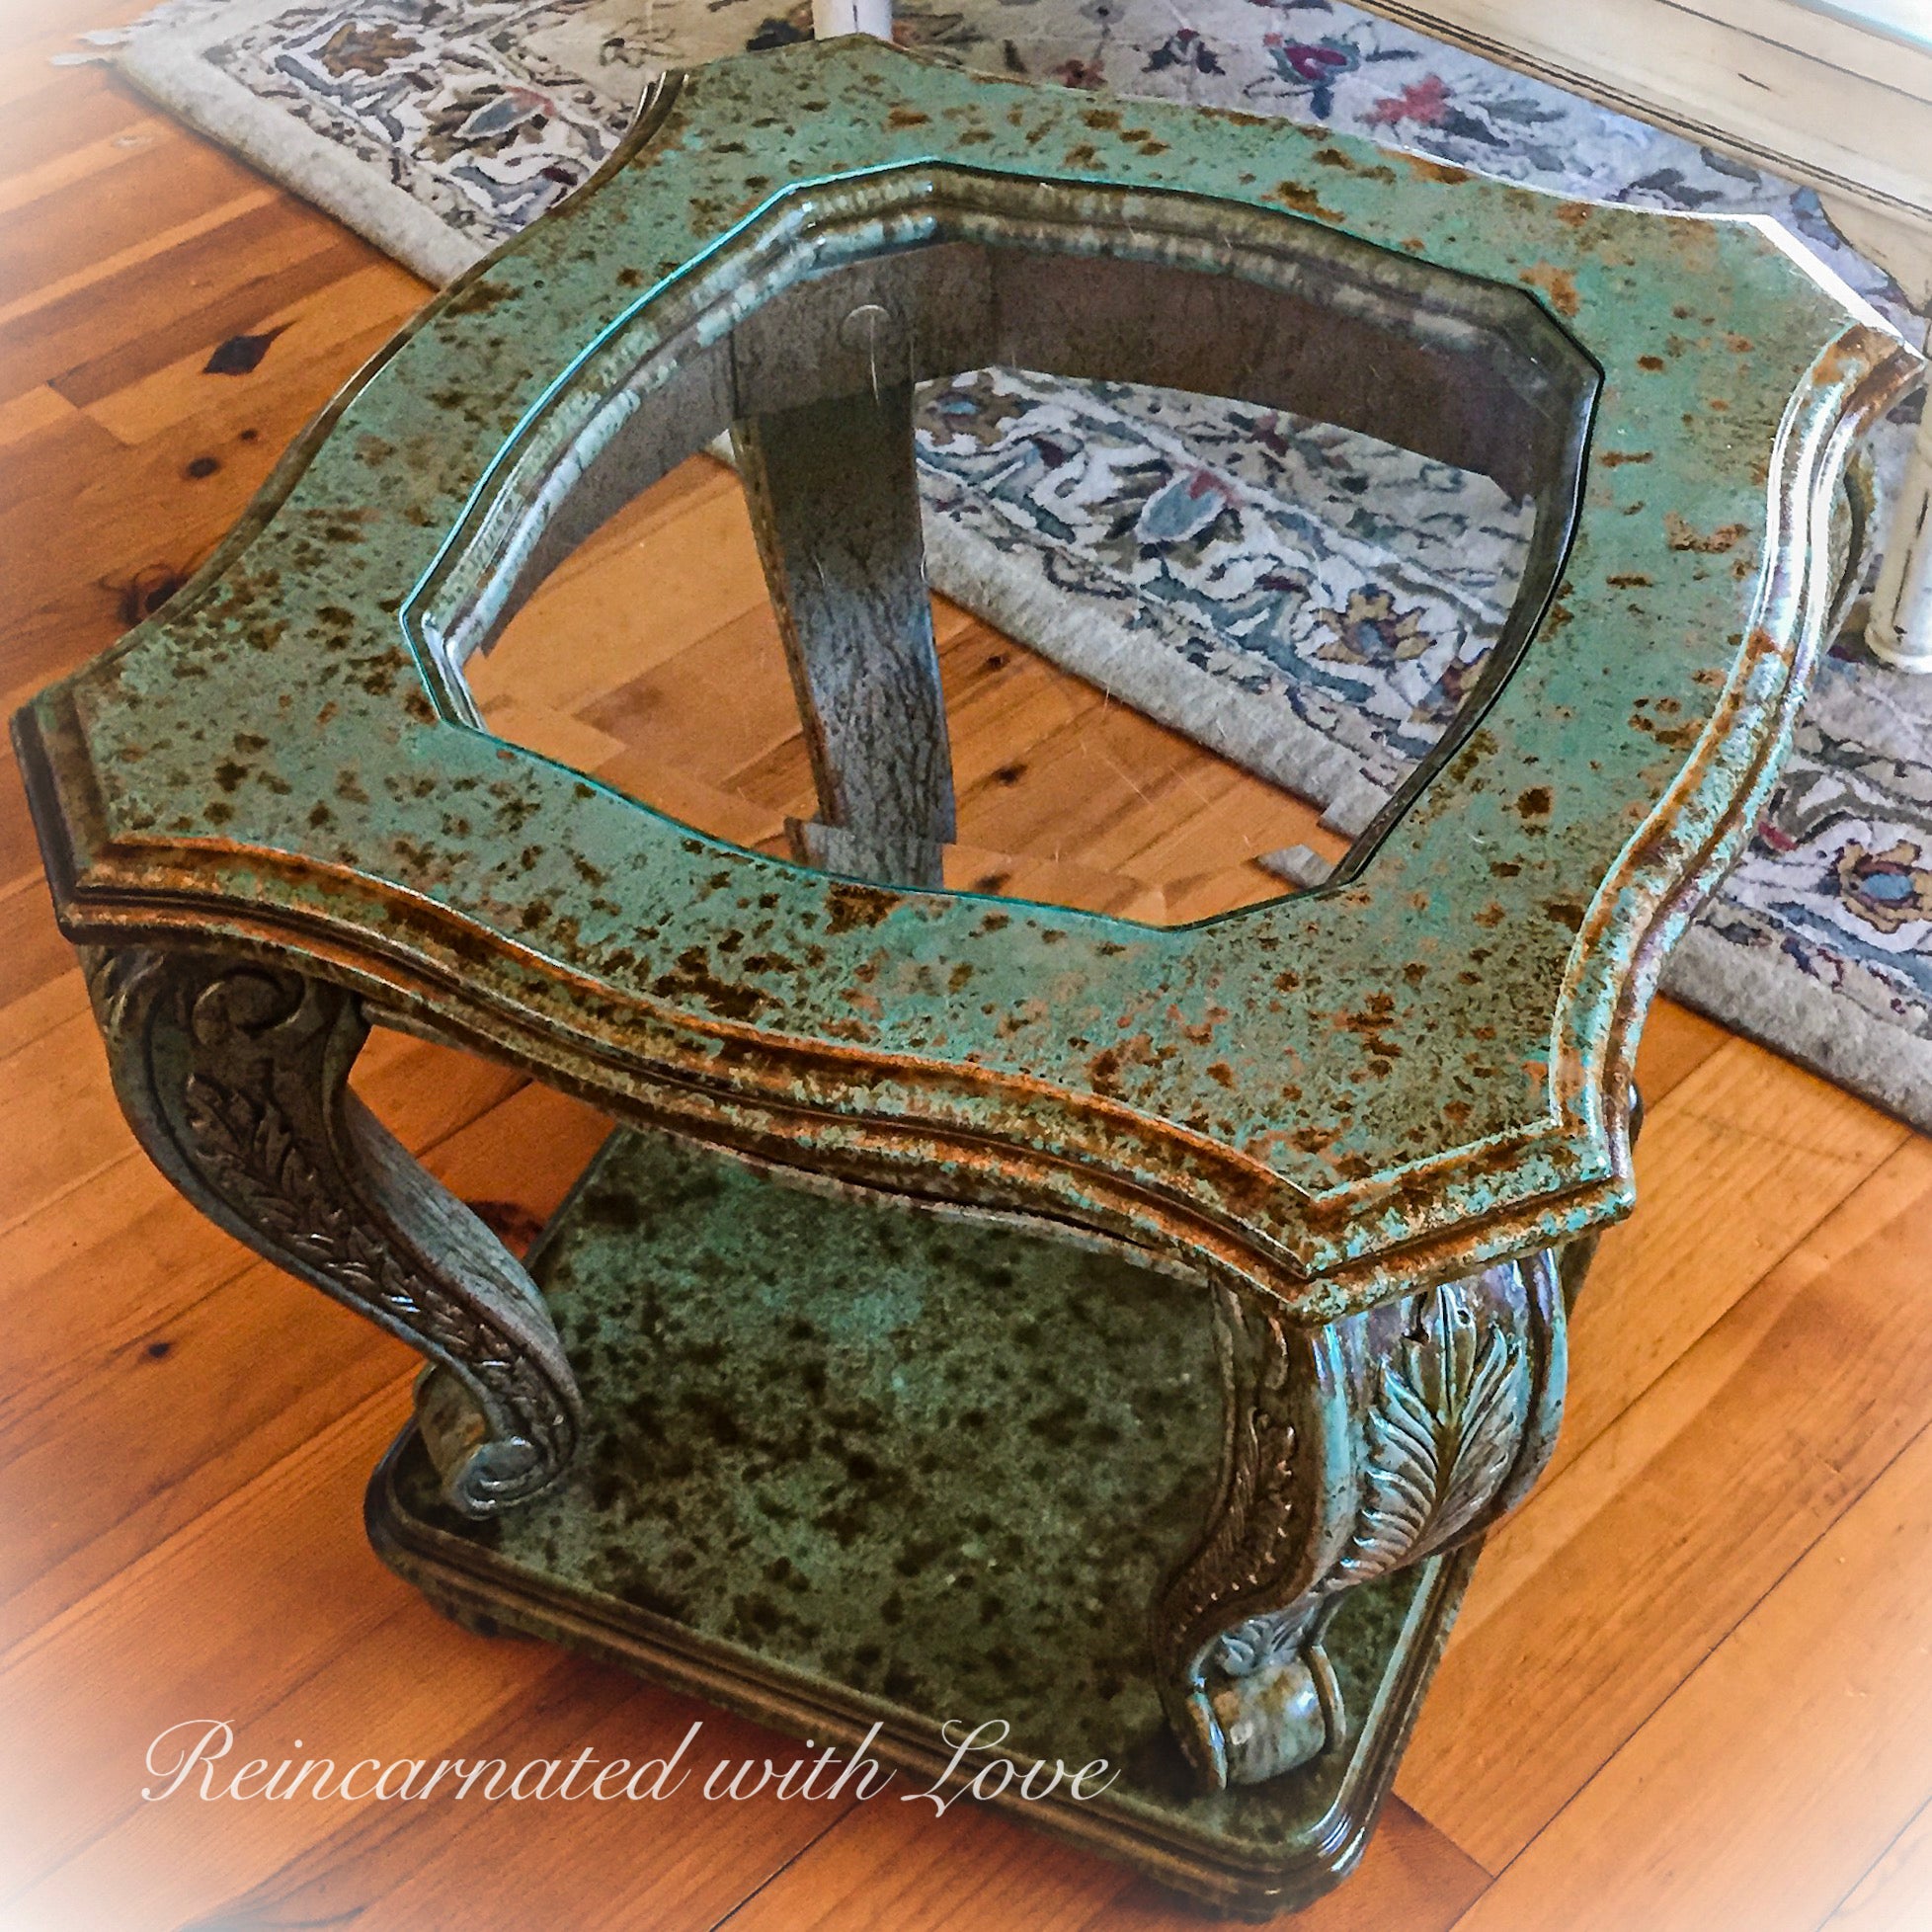 Solid wood, glass top, end table, done in a rusted copper, green patina finish, with vine accents carved into the table legs.